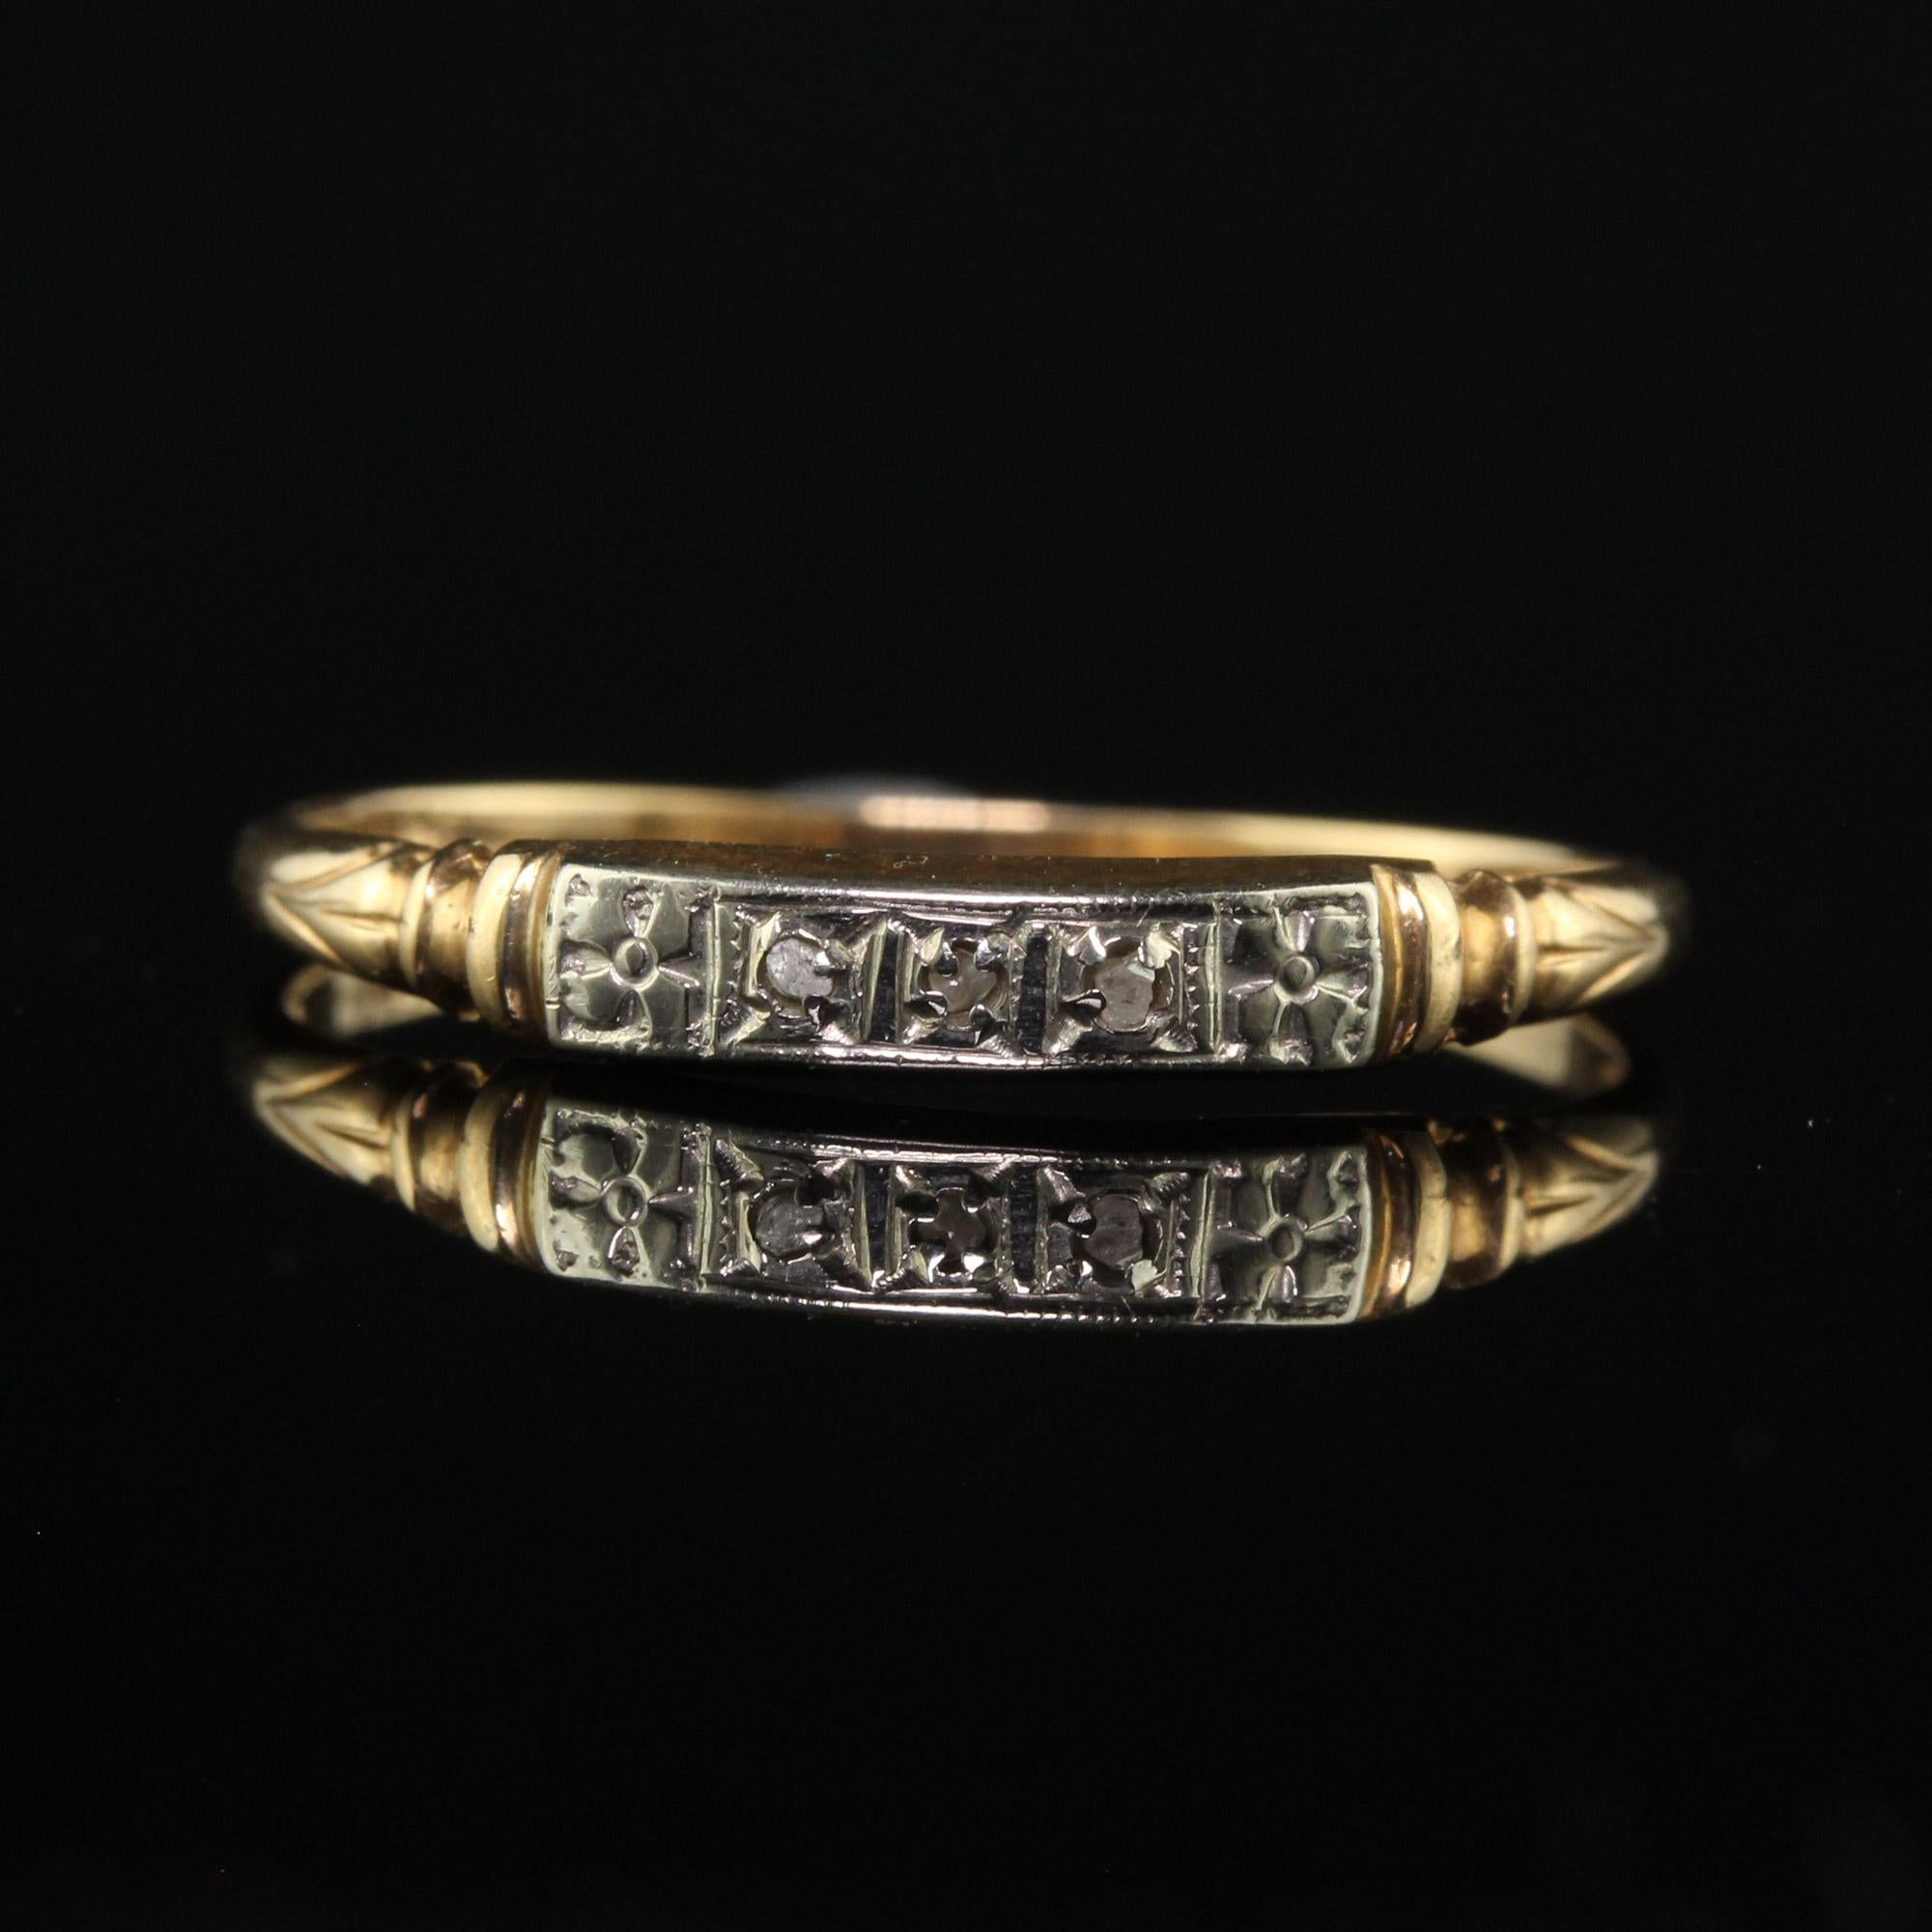 Antique Art Deco 14K Yellow Gold Rose Cut Diamond Wedding Band - Size 6 1/4 In Good Condition For Sale In Great Neck, NY